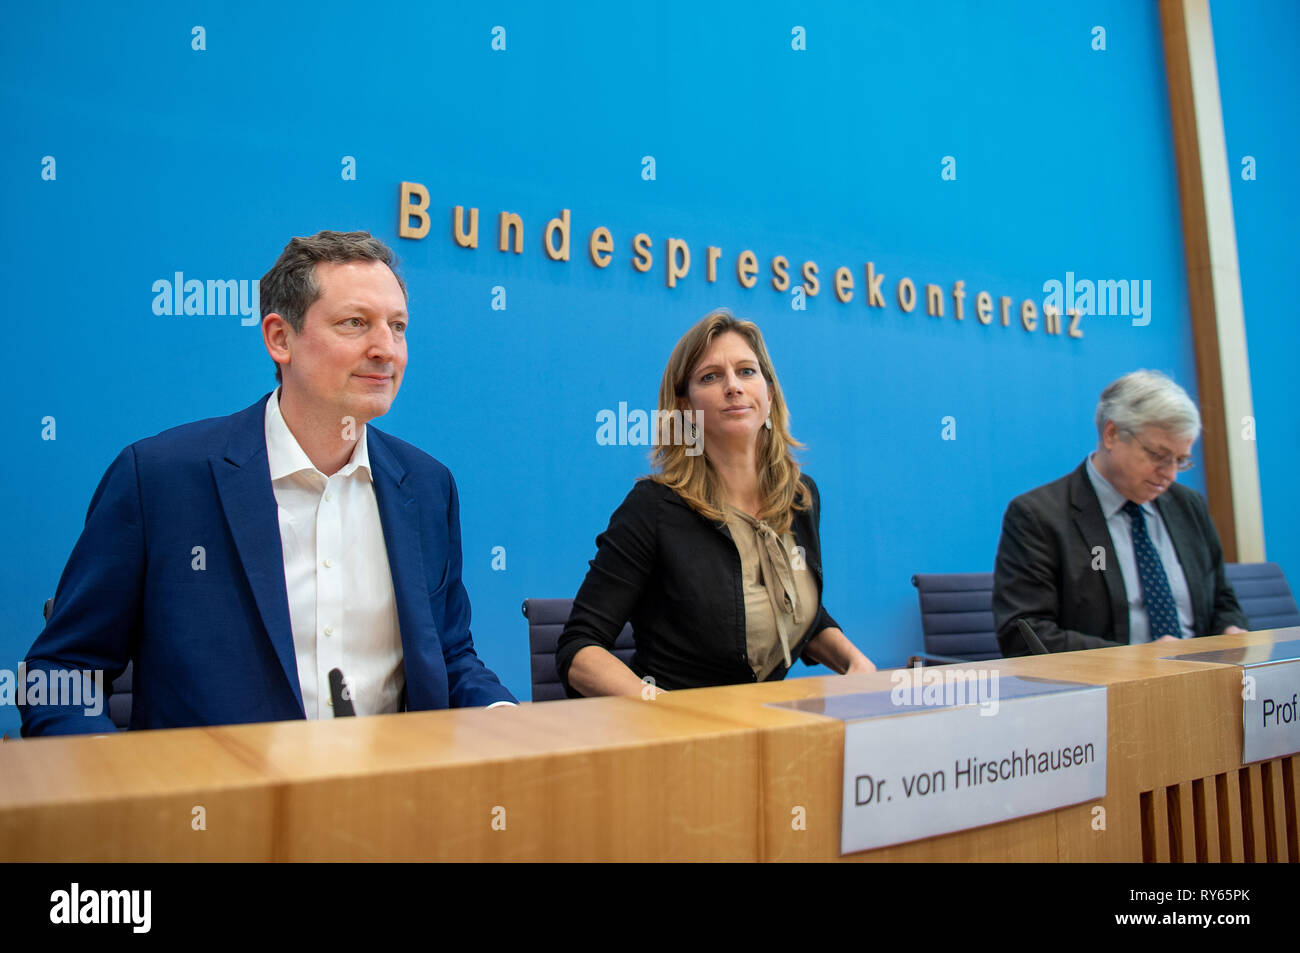 Berlin, Germany. 12th Mar, 2019. Eckart von Hirschhausen (l), doctor and science journalist, and Maja Göpel, Secretary General of the German Advisory Council on Global Change, speak at a press conference on the protests for climate protection by schoolchildren. Thousands of pupils in Germany want to take part in demonstrations for better climate protection next Friday as well. Credit: Monika Skolimowska/dpa-Zentralbild/dpa/Alamy Live News Stock Photo